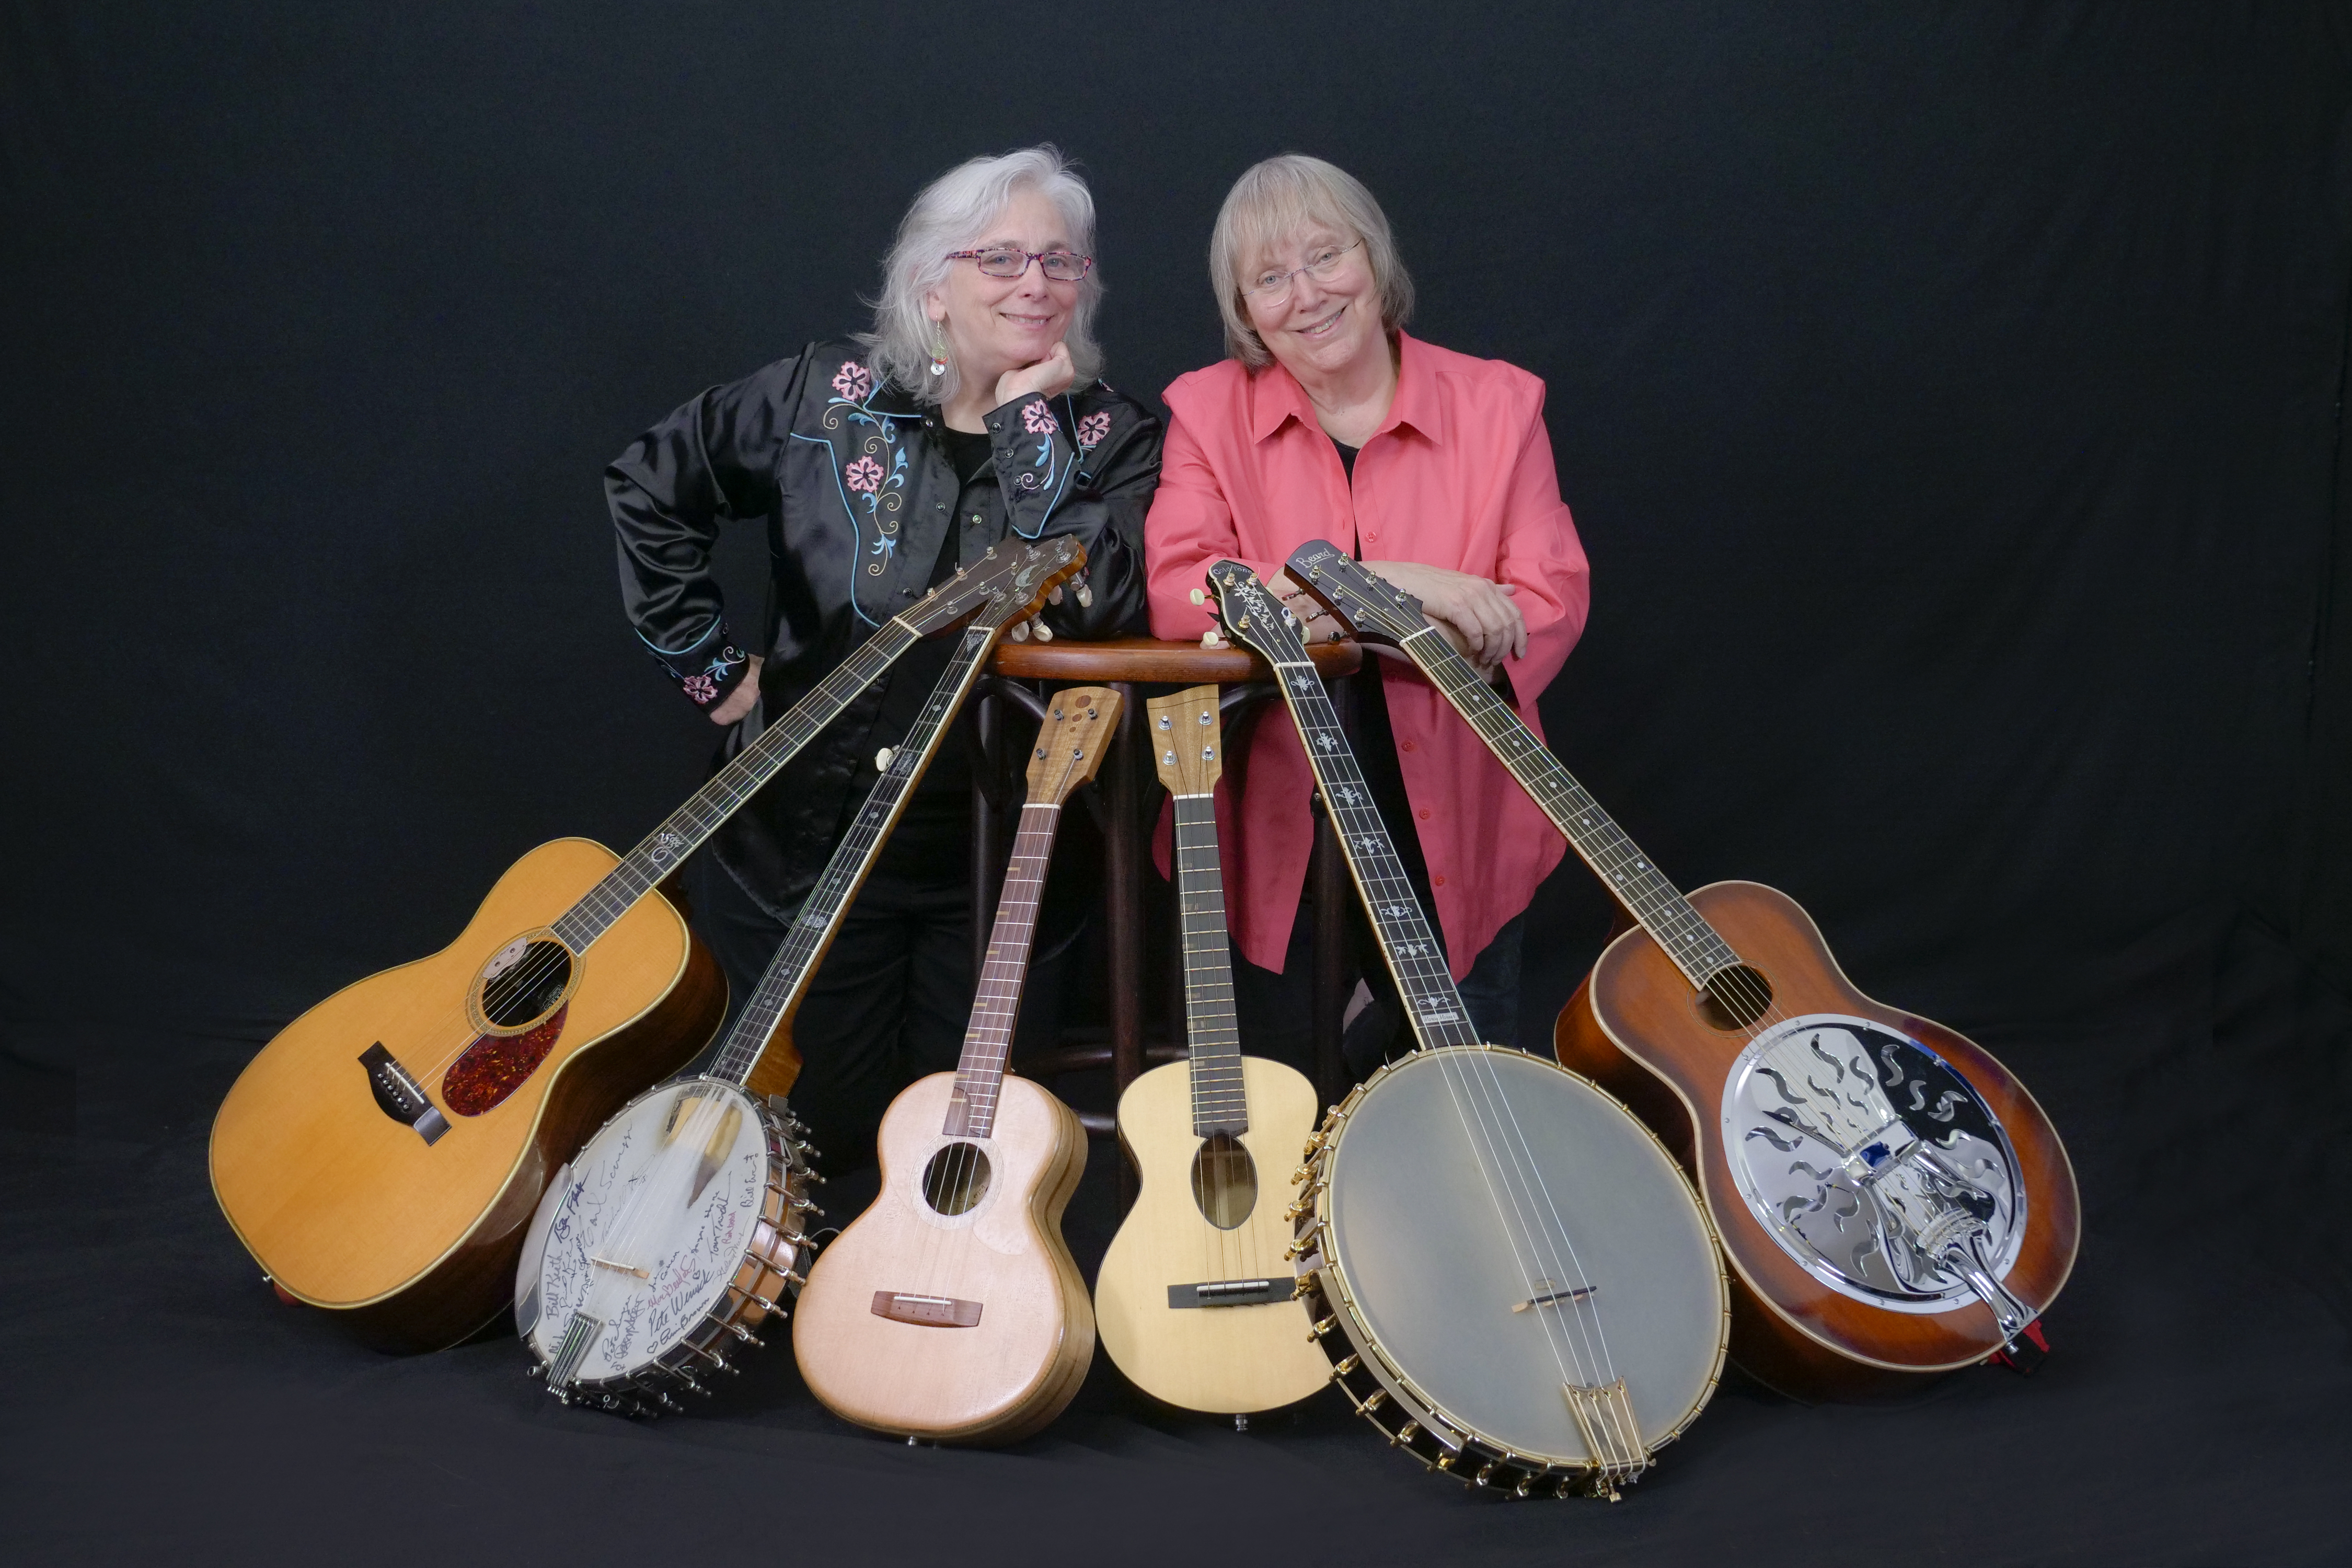 Laughter, and a bit of song, help musical duo along road to recovery